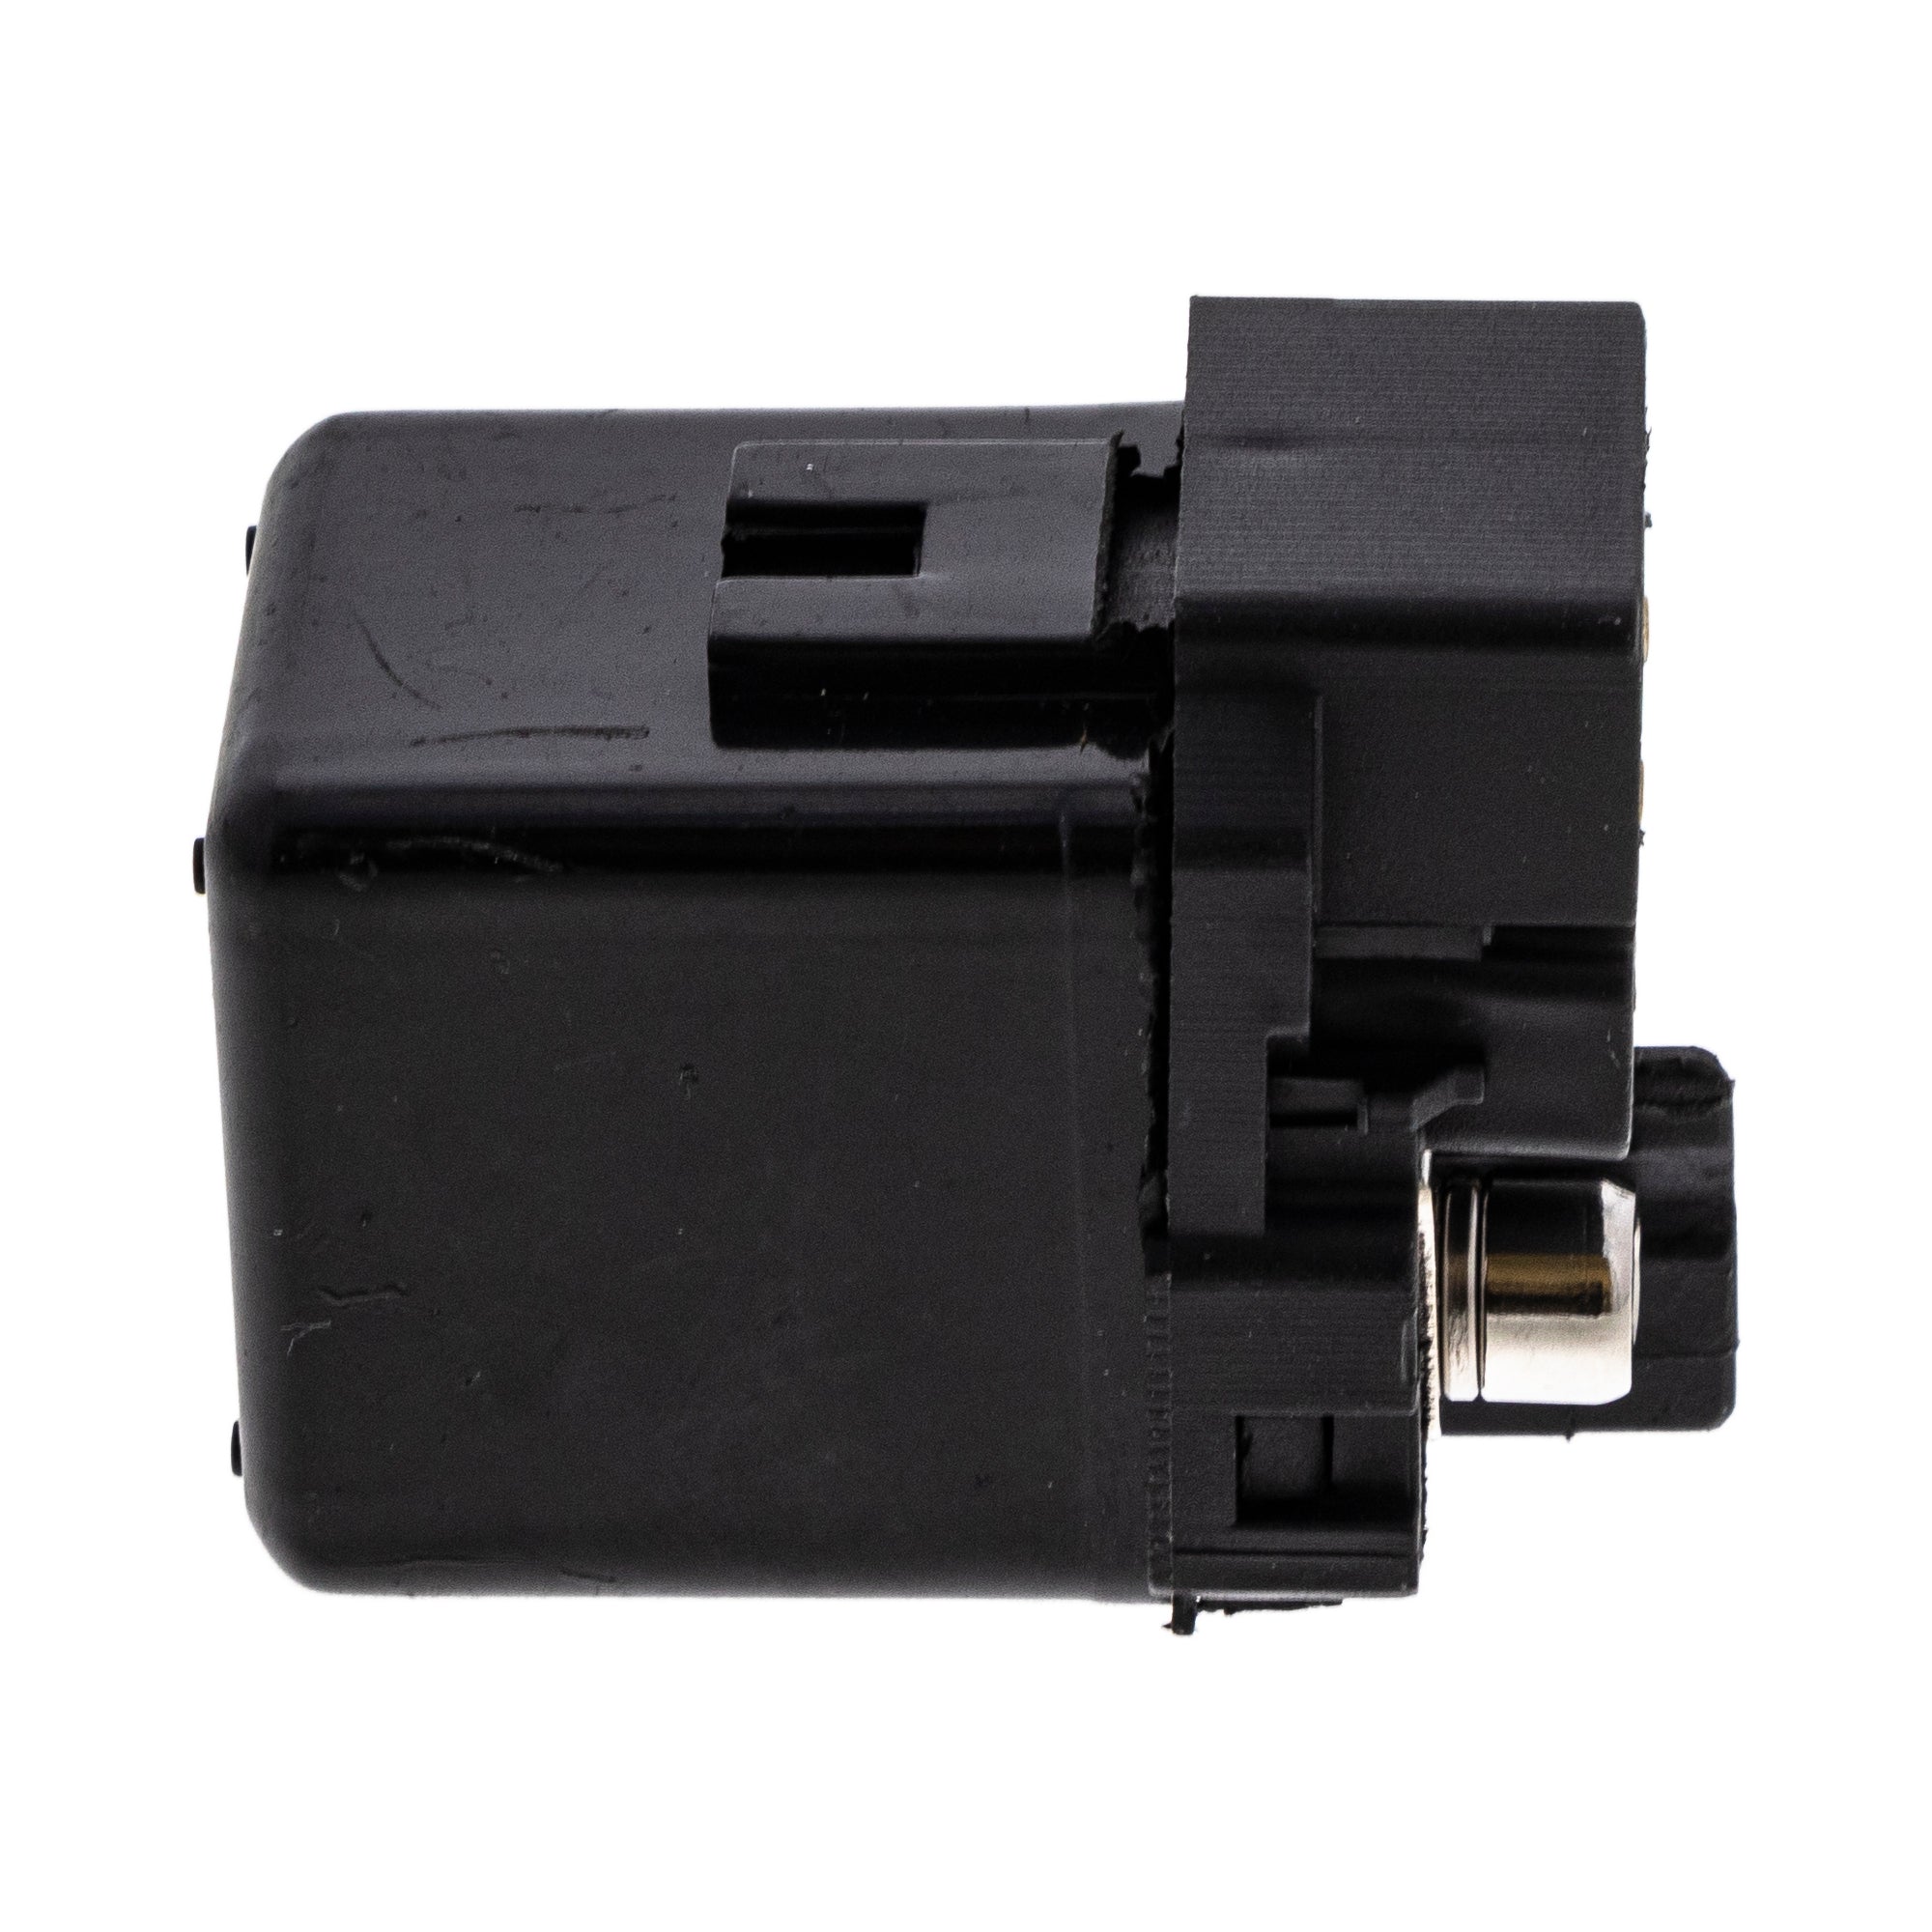 Starter Solenoid Relay Replacement For Honda 35850-MB0-007, 35850-425-017,  35850-ME8-007, 35850-MJ0-000